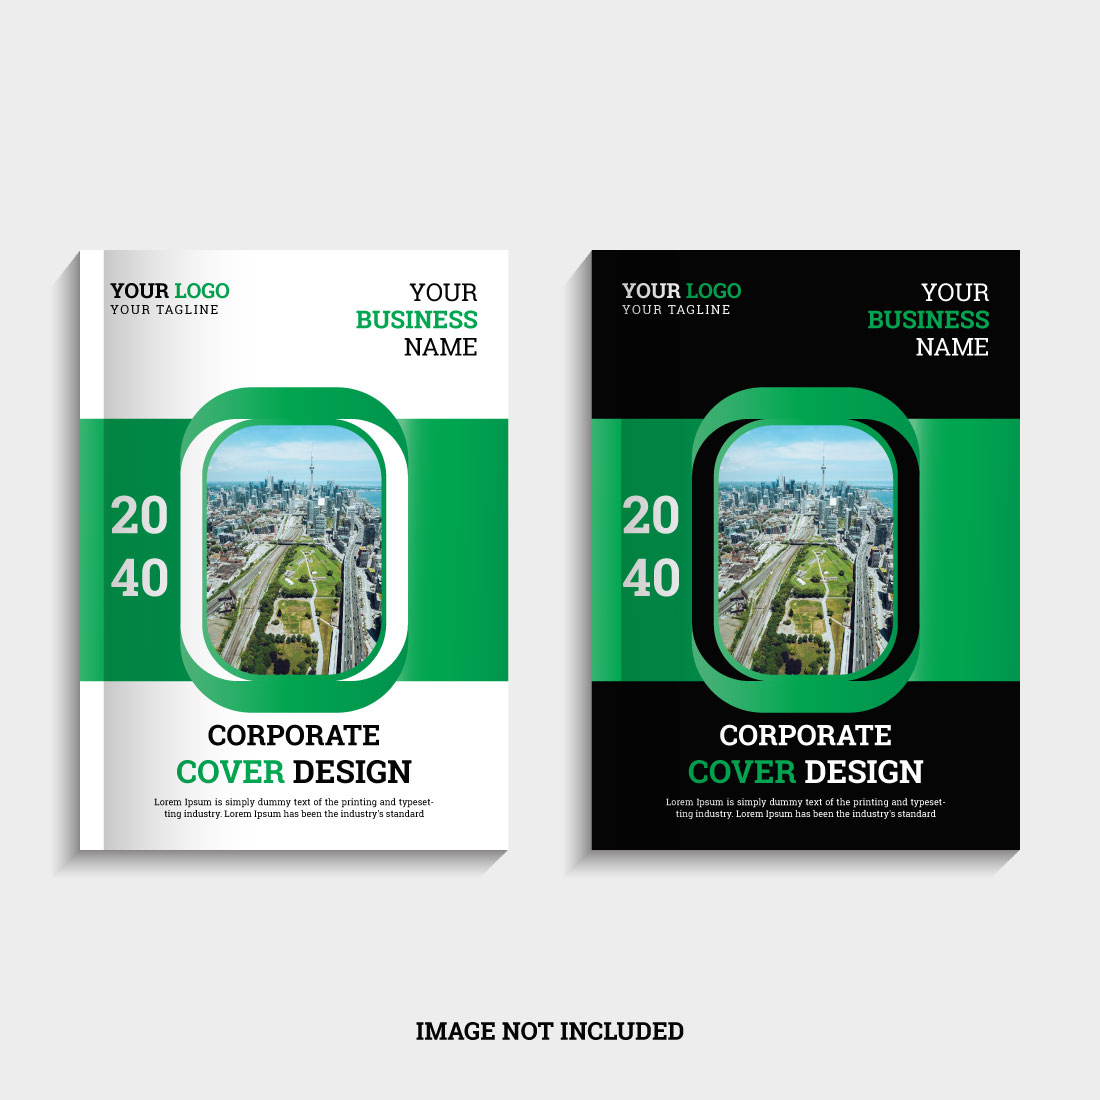 Green and black brochure with a picture of a city.